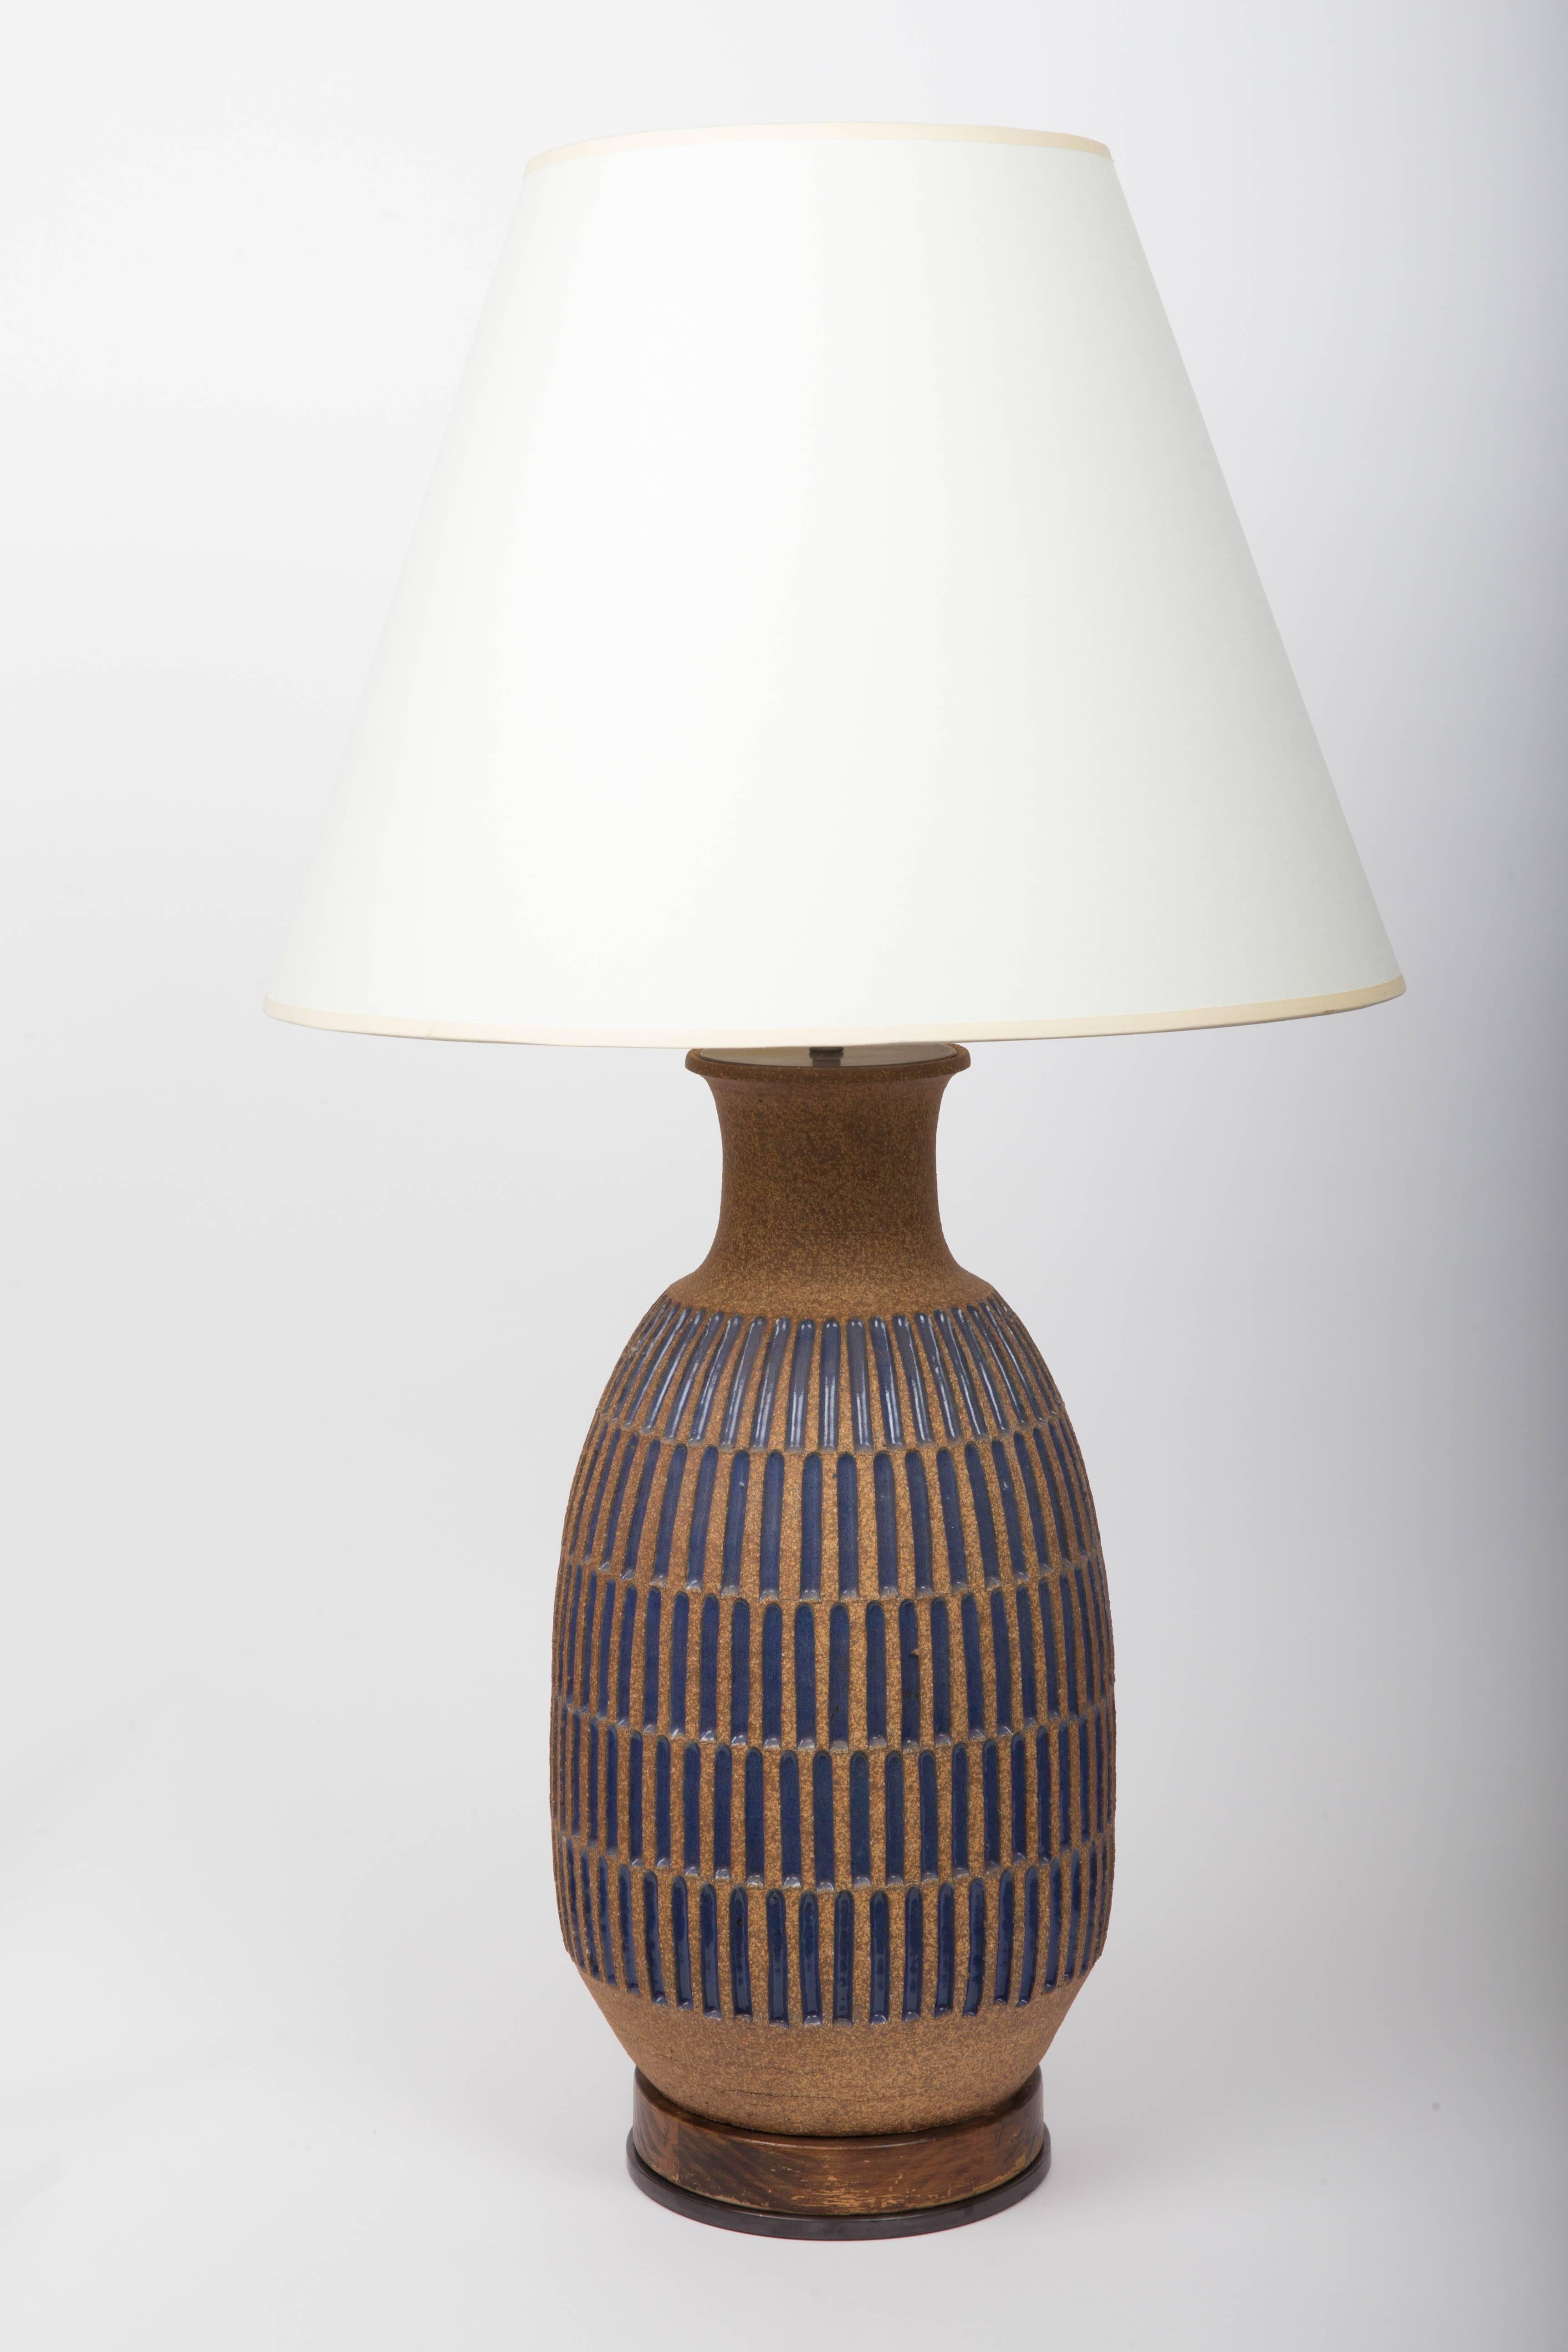 Blue glaze earthenware table lamp by David Cressey

Shade not included
Newly rewired with black twisted silk cord and bronze finish on fittings.